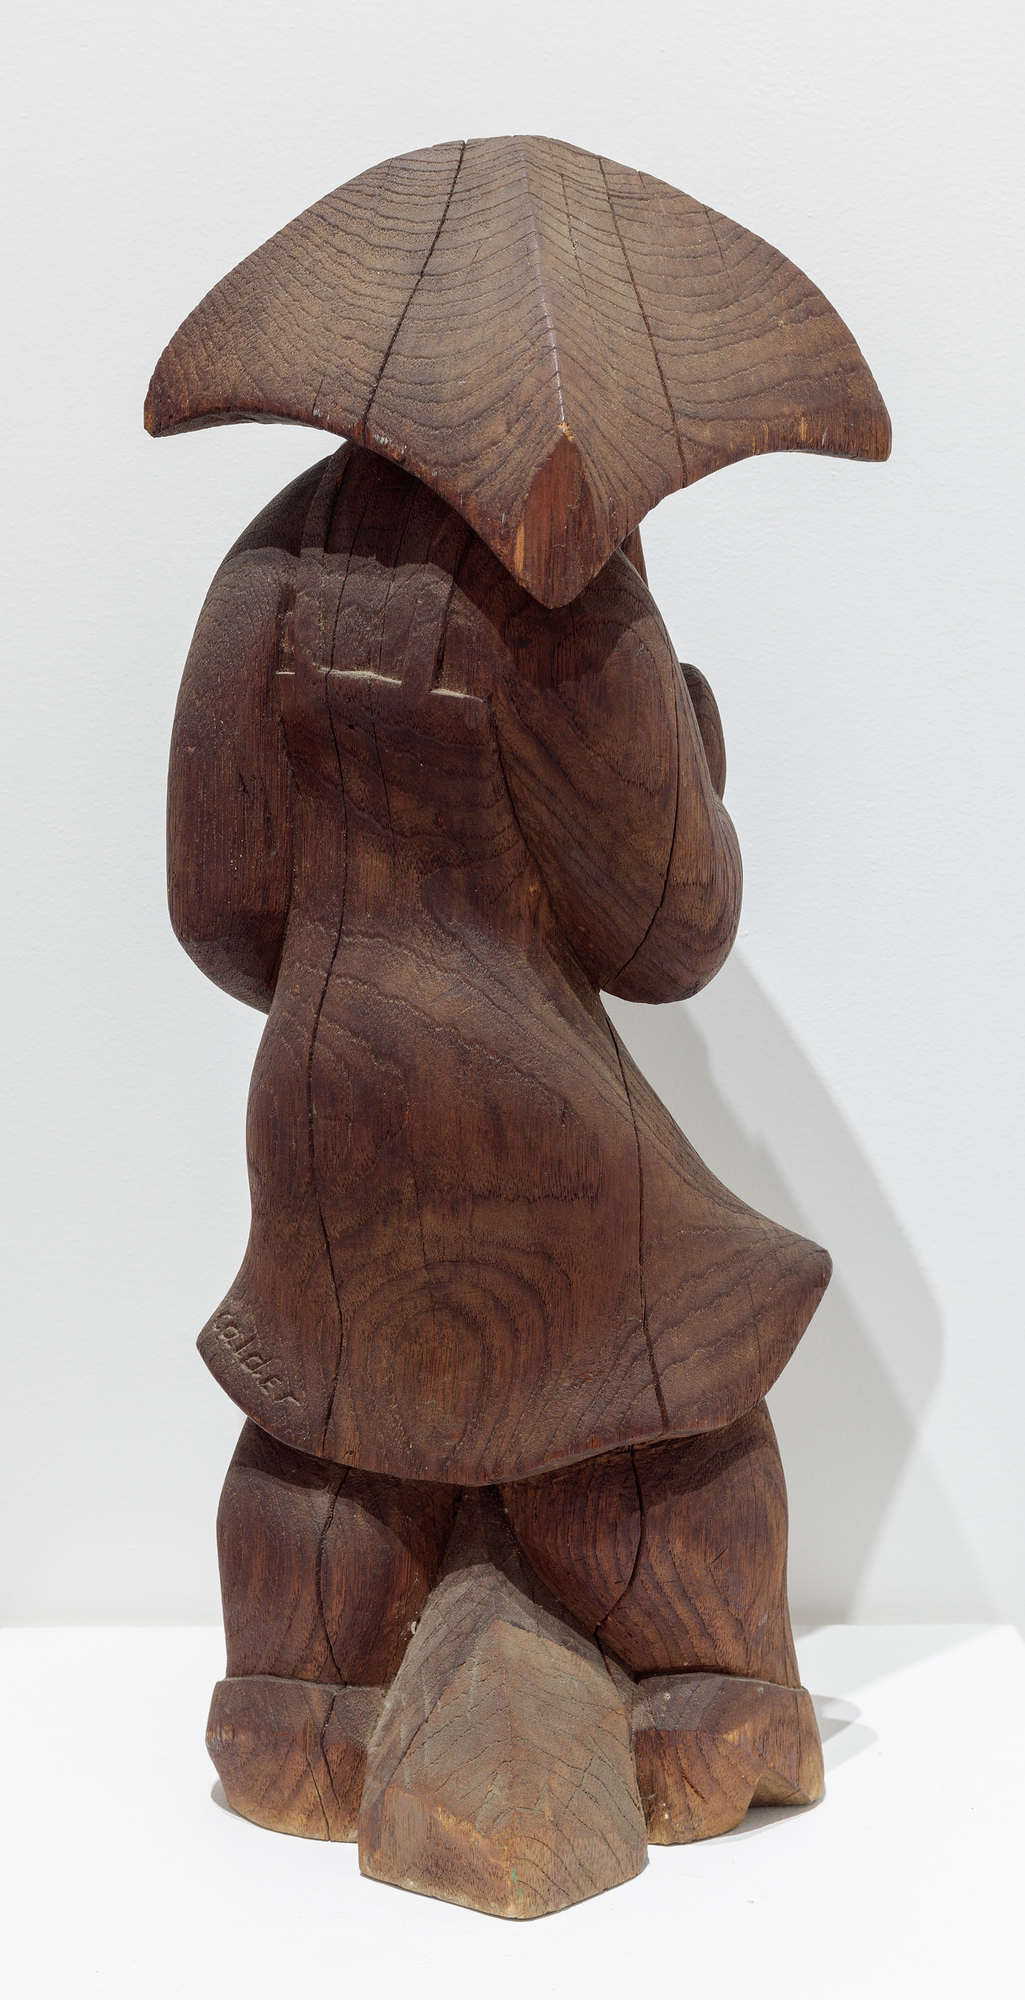 After disappointing sales at Weyhe Gallery in 1928, Calder turned from sculpted wire portraits and figures to the more conventional medium of wood. On the advice of sculptor Chaim Gross, he purchased small blocks of wood from Monteath, a Brooklyn supplier of tropical woods. He spent much of that summer on a Peekskill, New York farm carving. In each case, the woodblock suggested how he might preserve its overall shape and character as he subsumed those attributes in a single form.  There was a directness about working in wood that appealed to him. Carved from a single block of wood, Woman with Square Umbrella is not very different from the subjects of his wire sculptures except that he supplanted the ethereal nature of using wire with a more corporeal medium.
<br>© 2023 Calder Foundation, New York / Artists Rights Society (ARS), New York